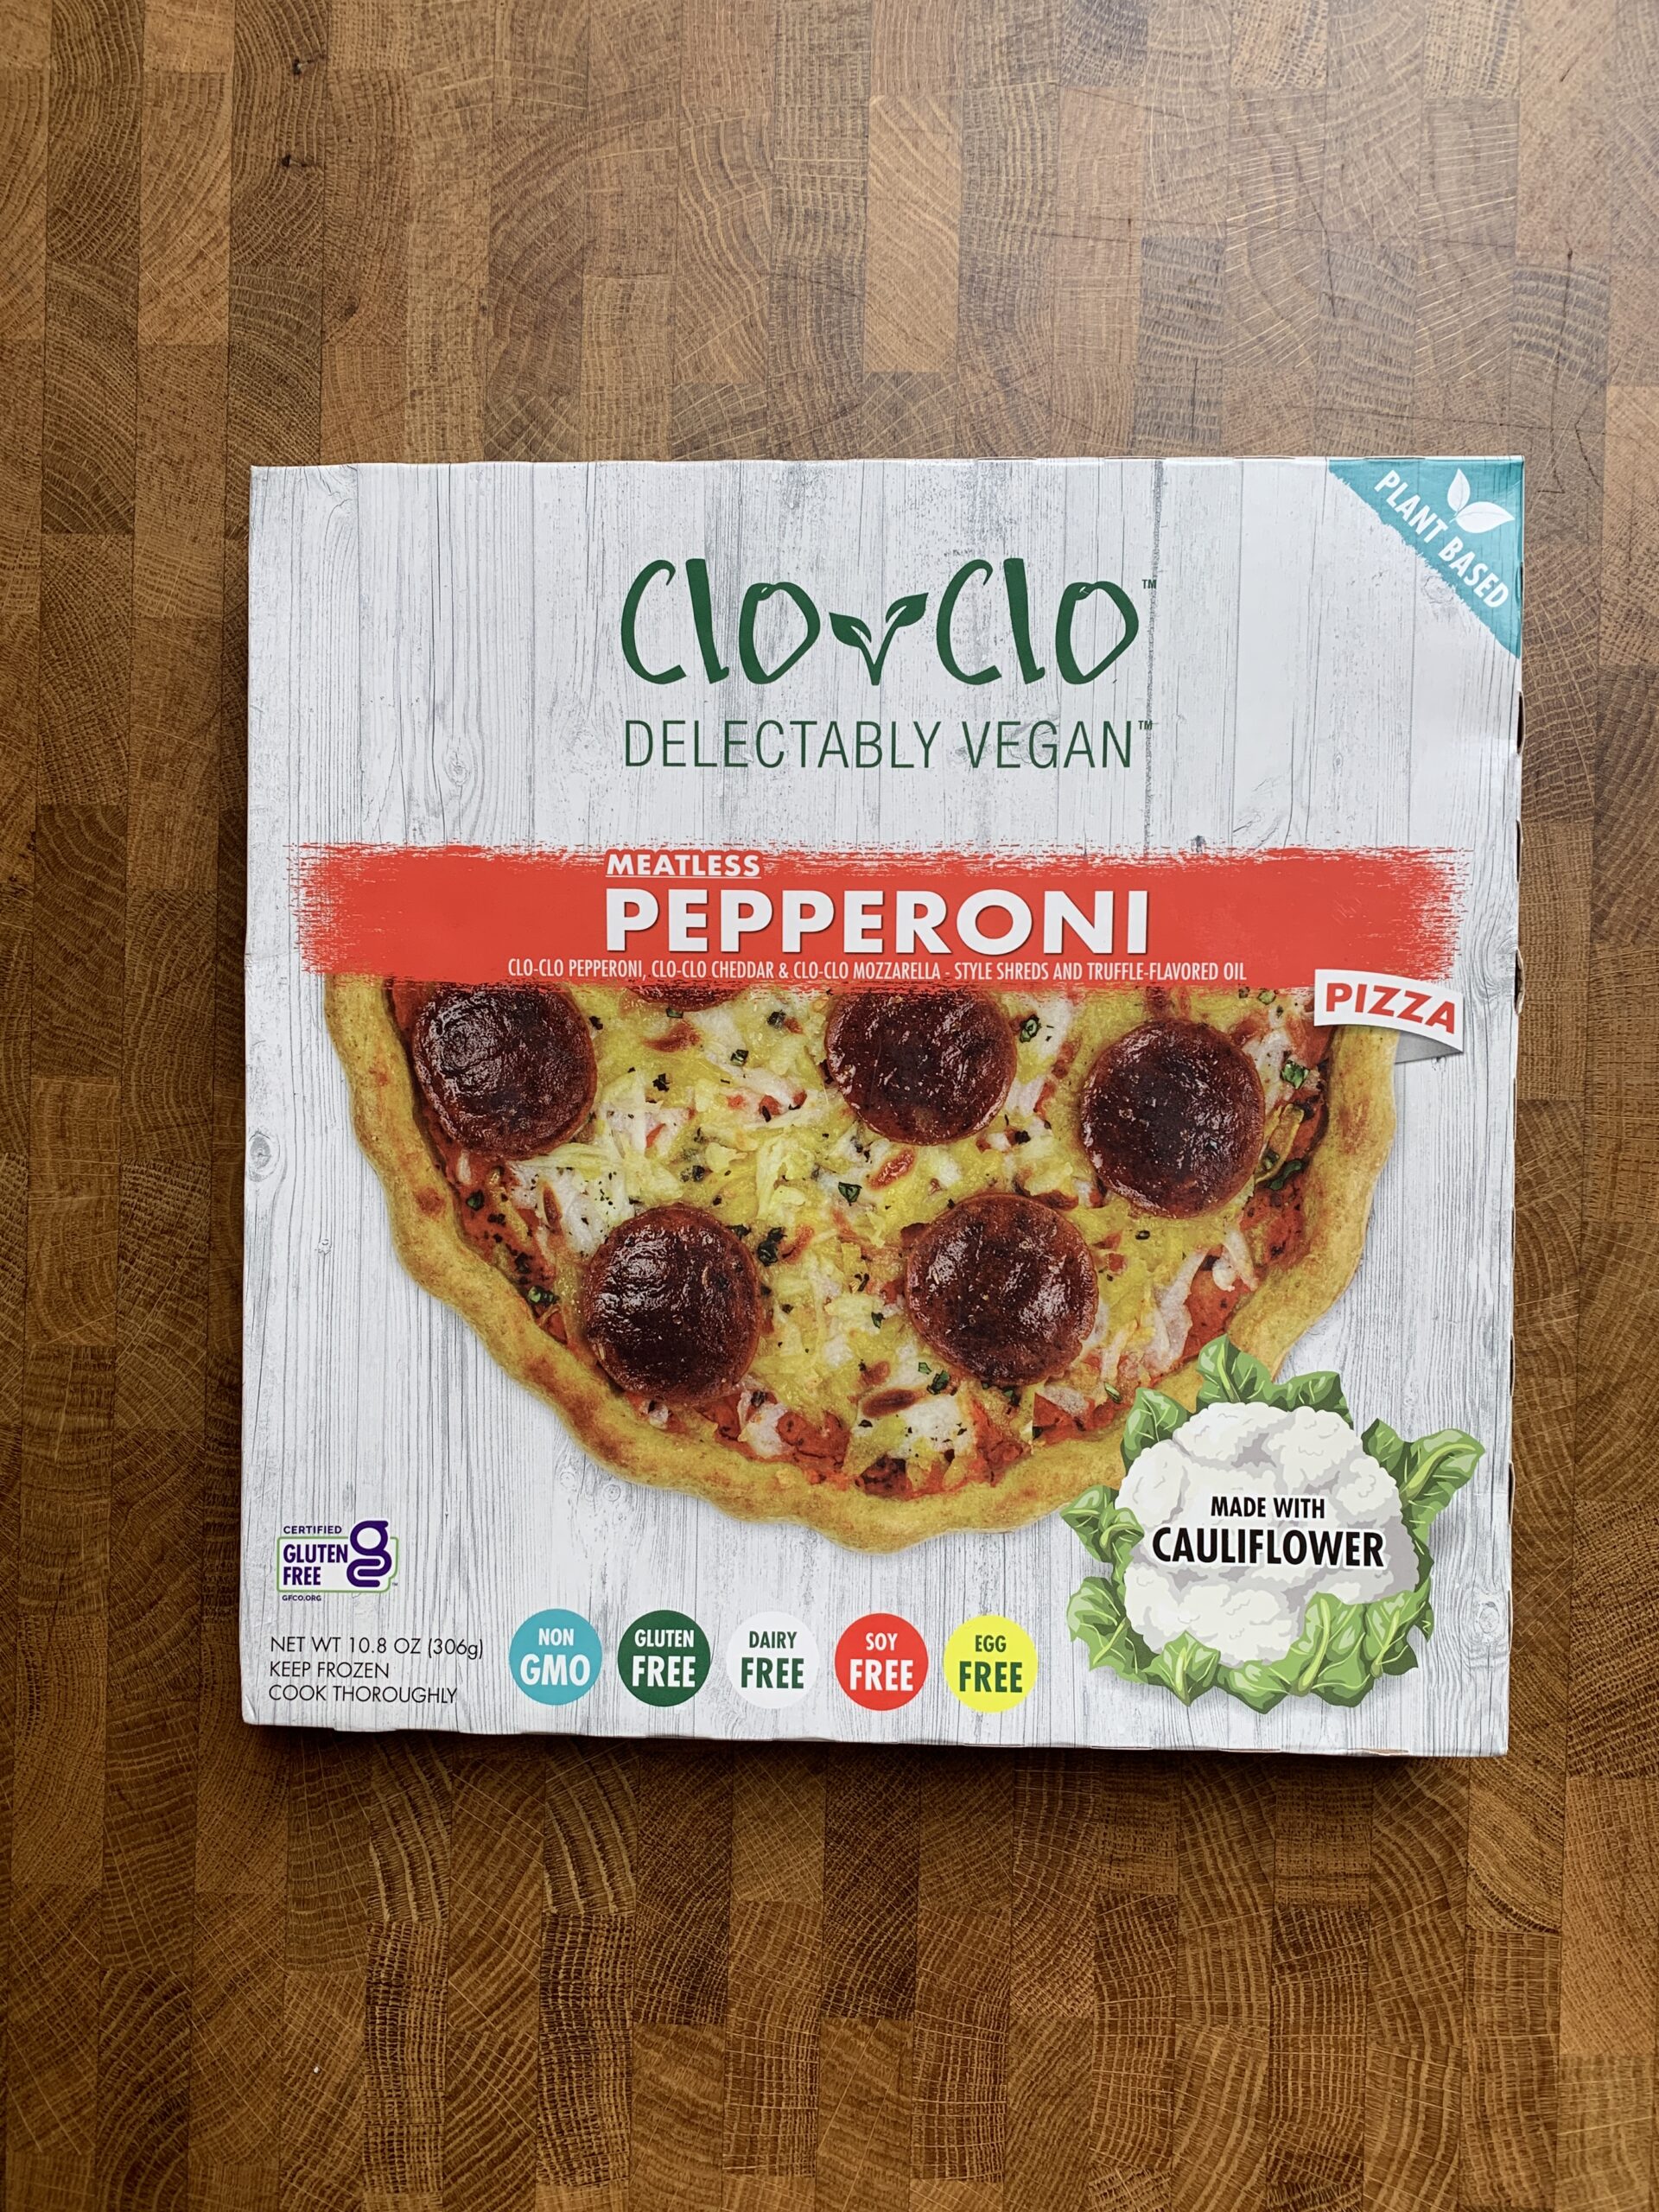 Clo Clo delectably vegan meatless pepperoni pizza box.